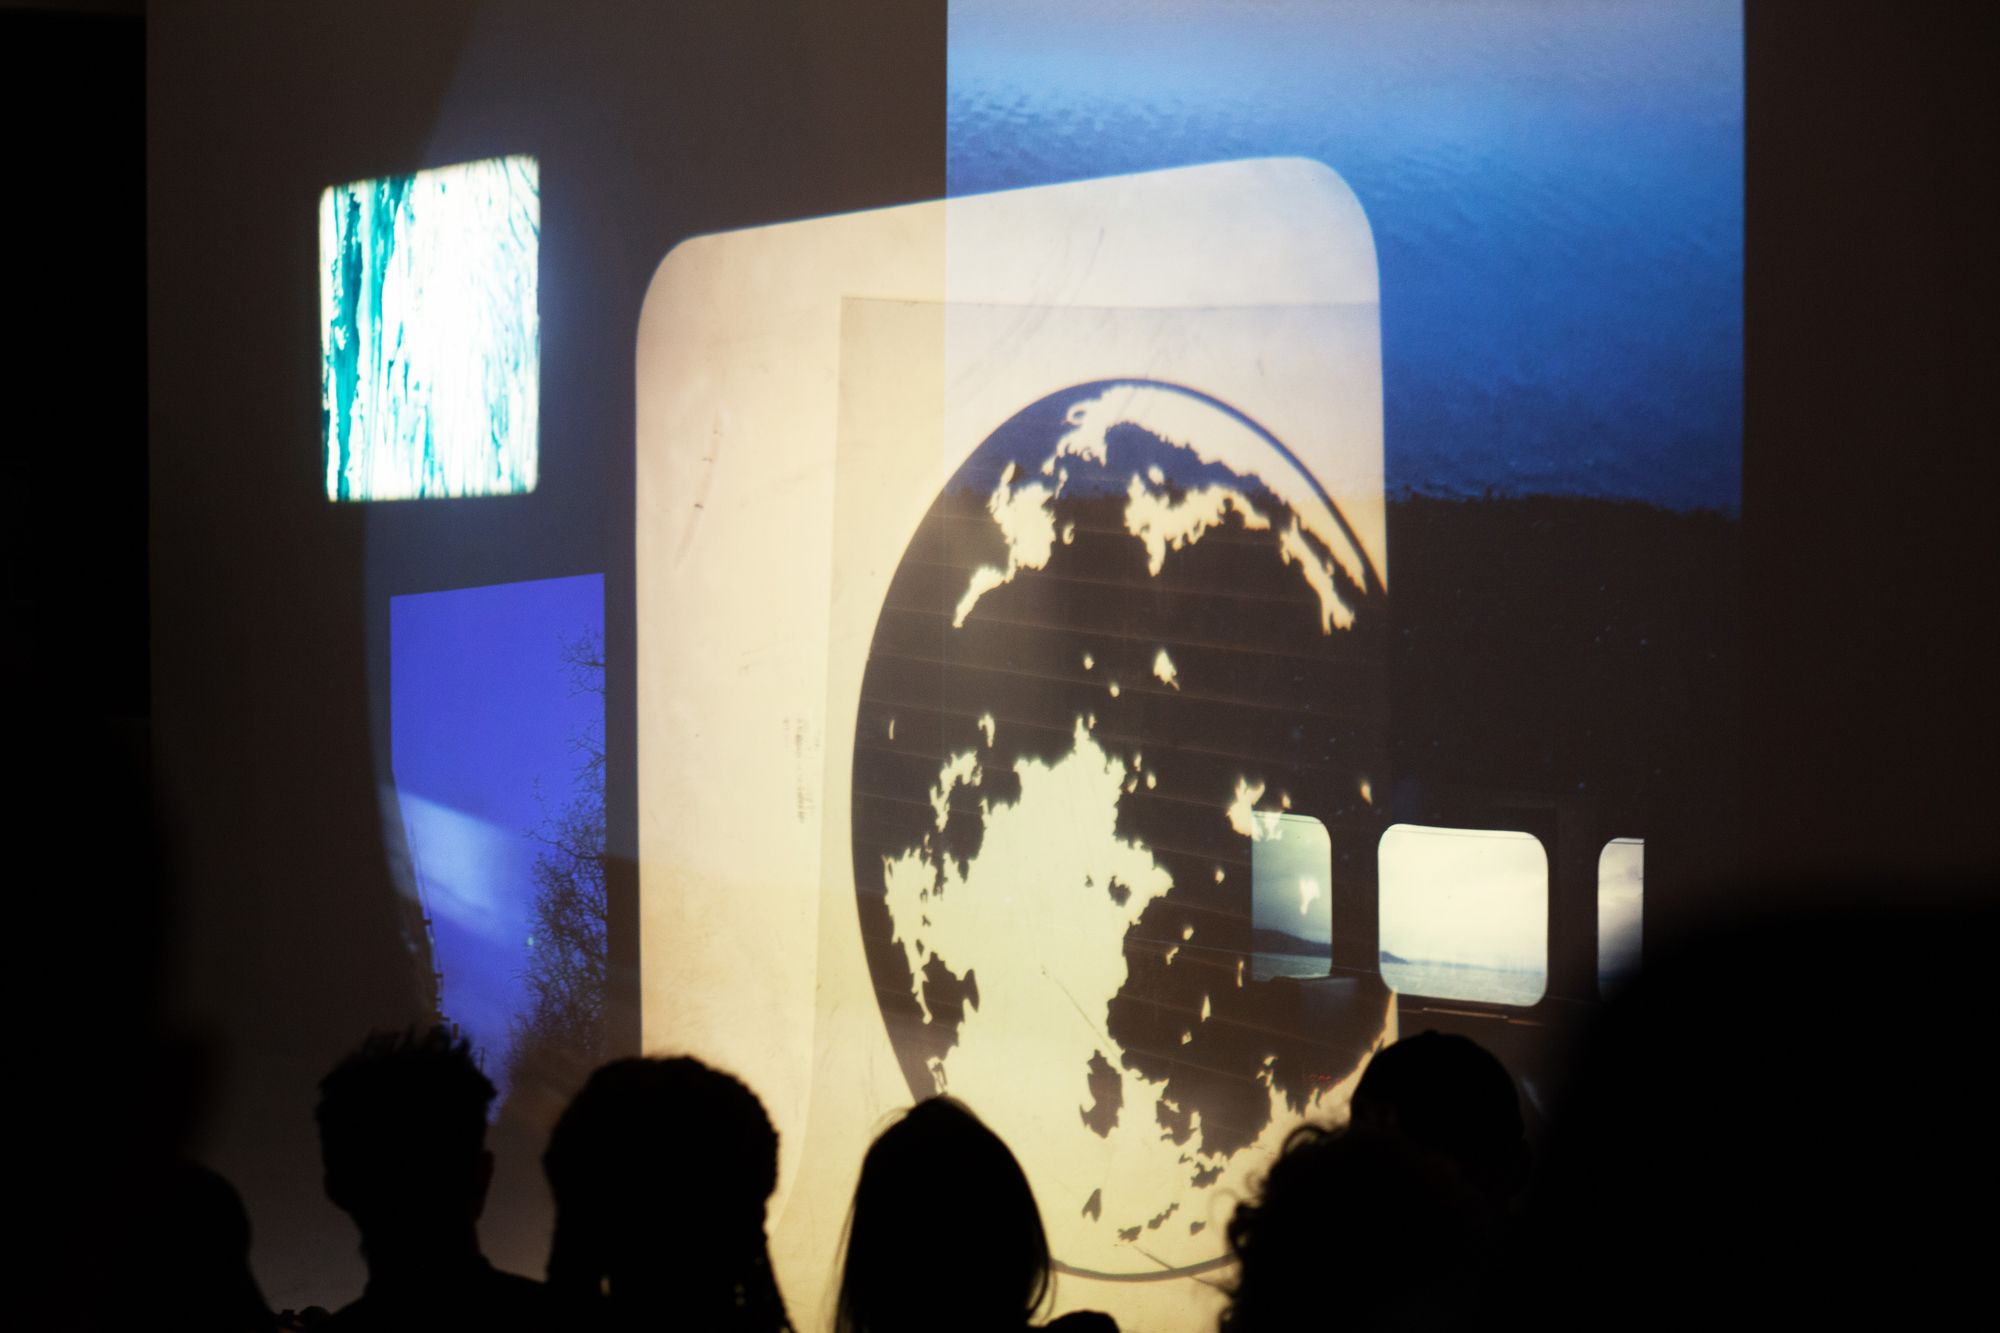 Abstract images including the moon projected in front of an audience.